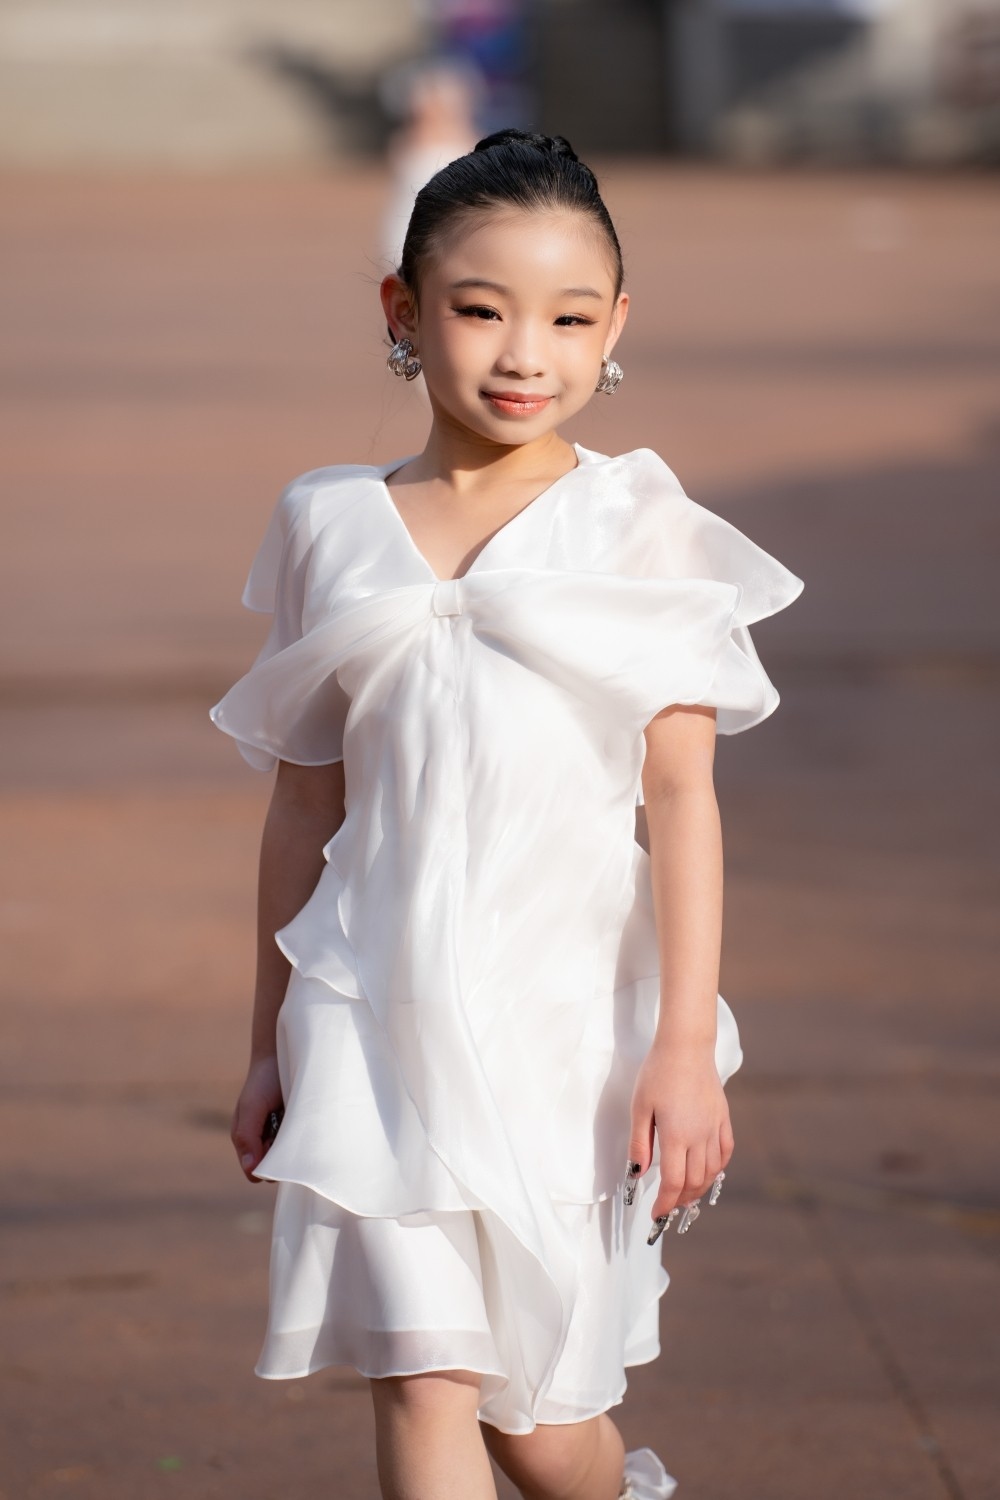 local models join asian kids fashion week in rok picture 6